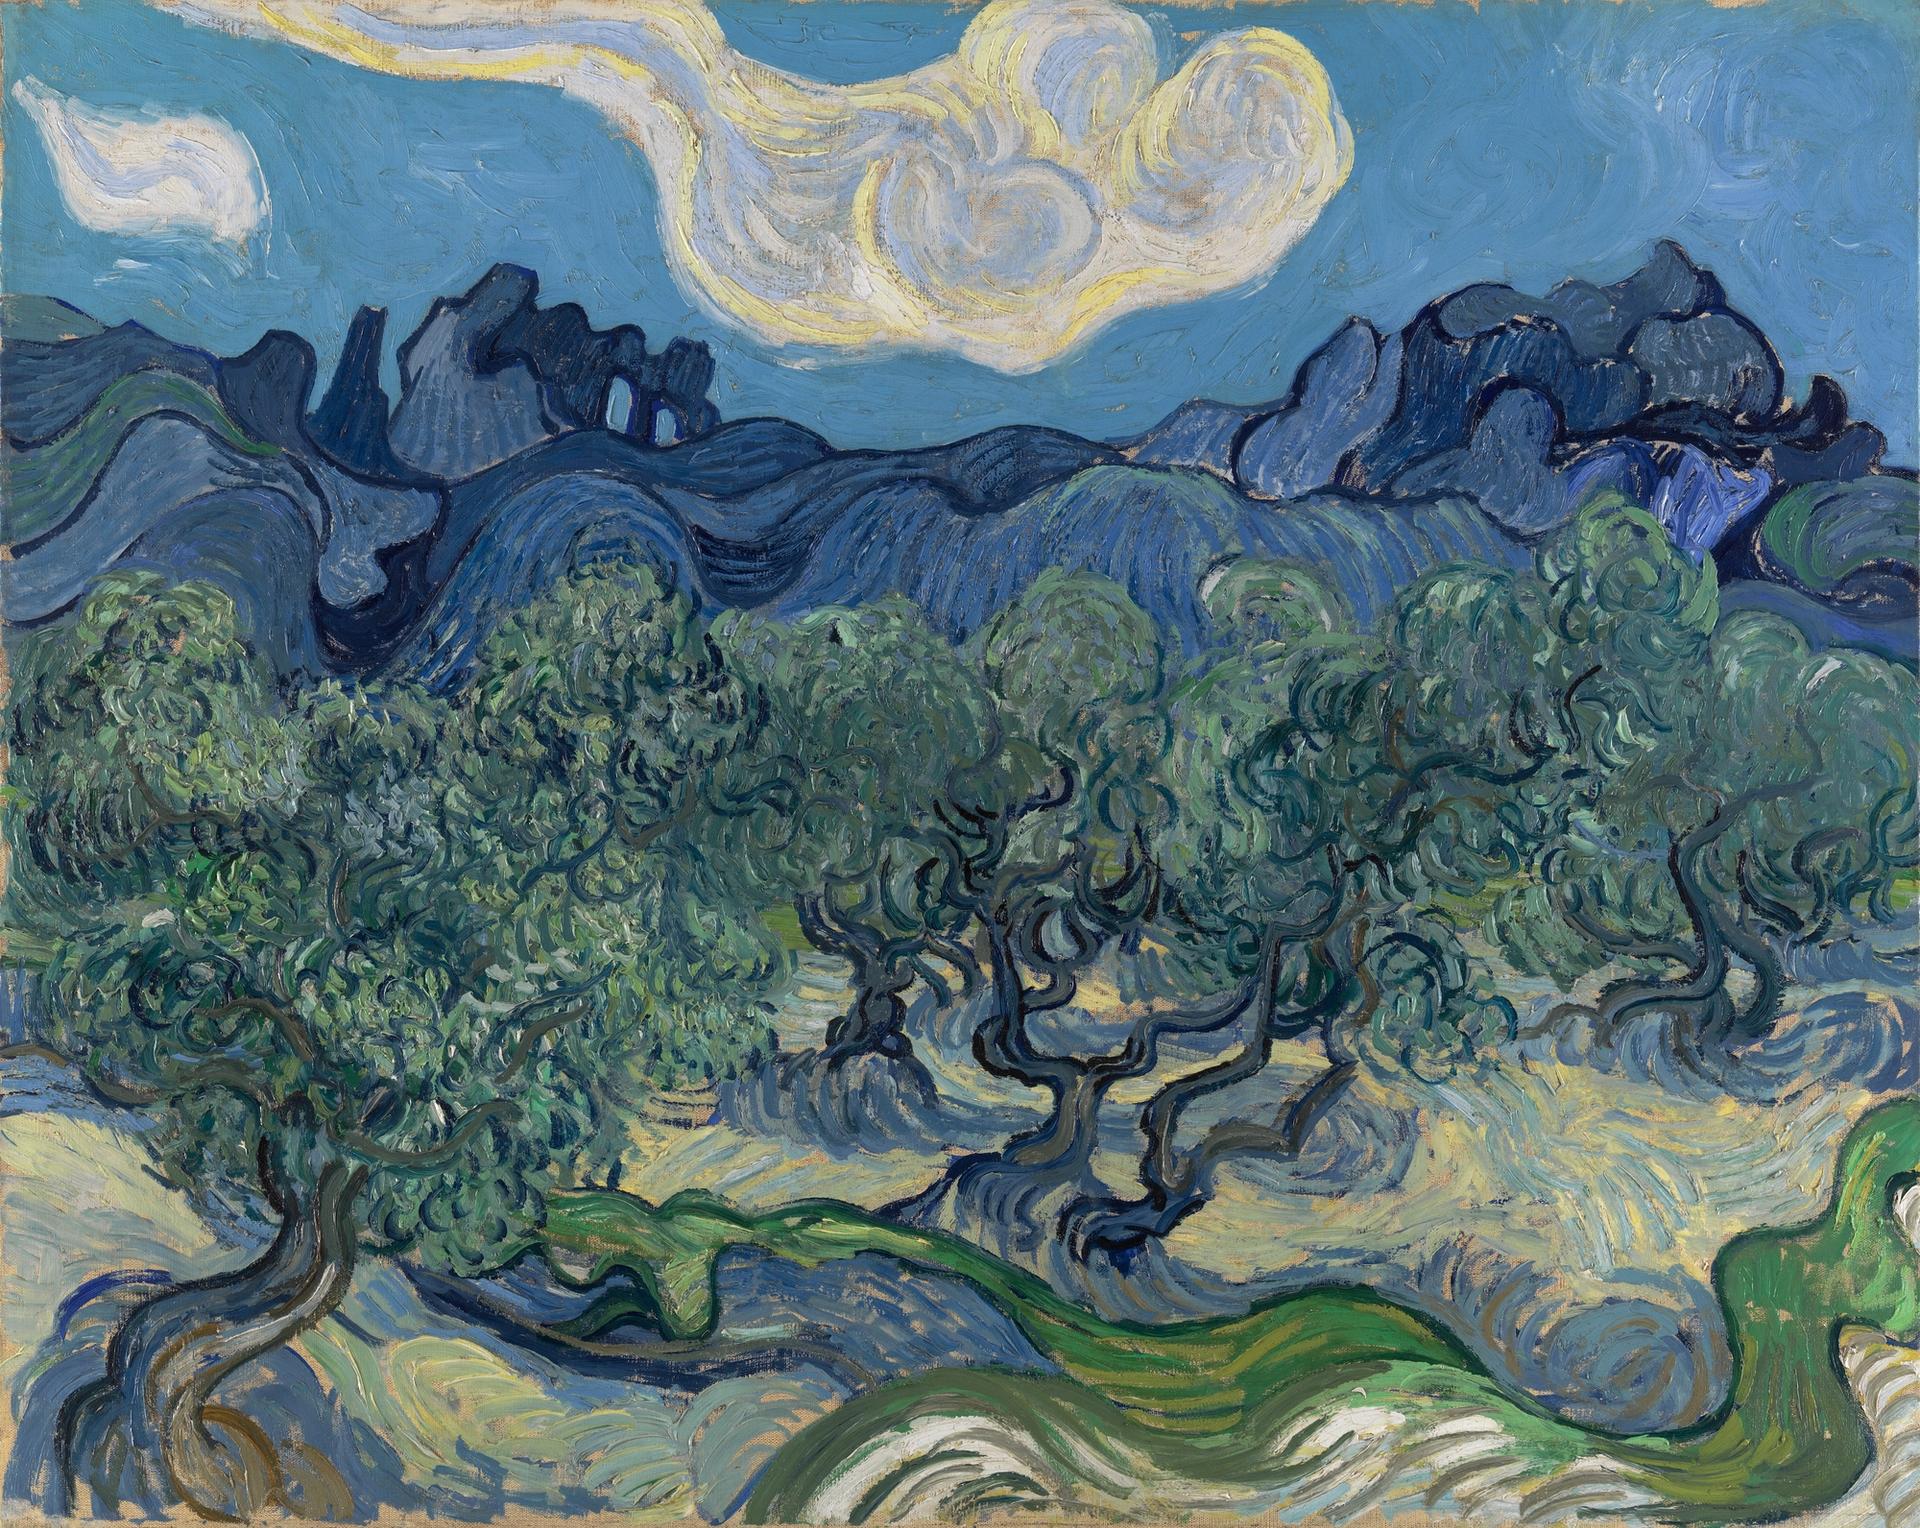 Van Gogh’s The Olive Trees with Les Alpilles (1889) The Museum of Modern Art, New York. Mrs. John Hay Whitney Bequest